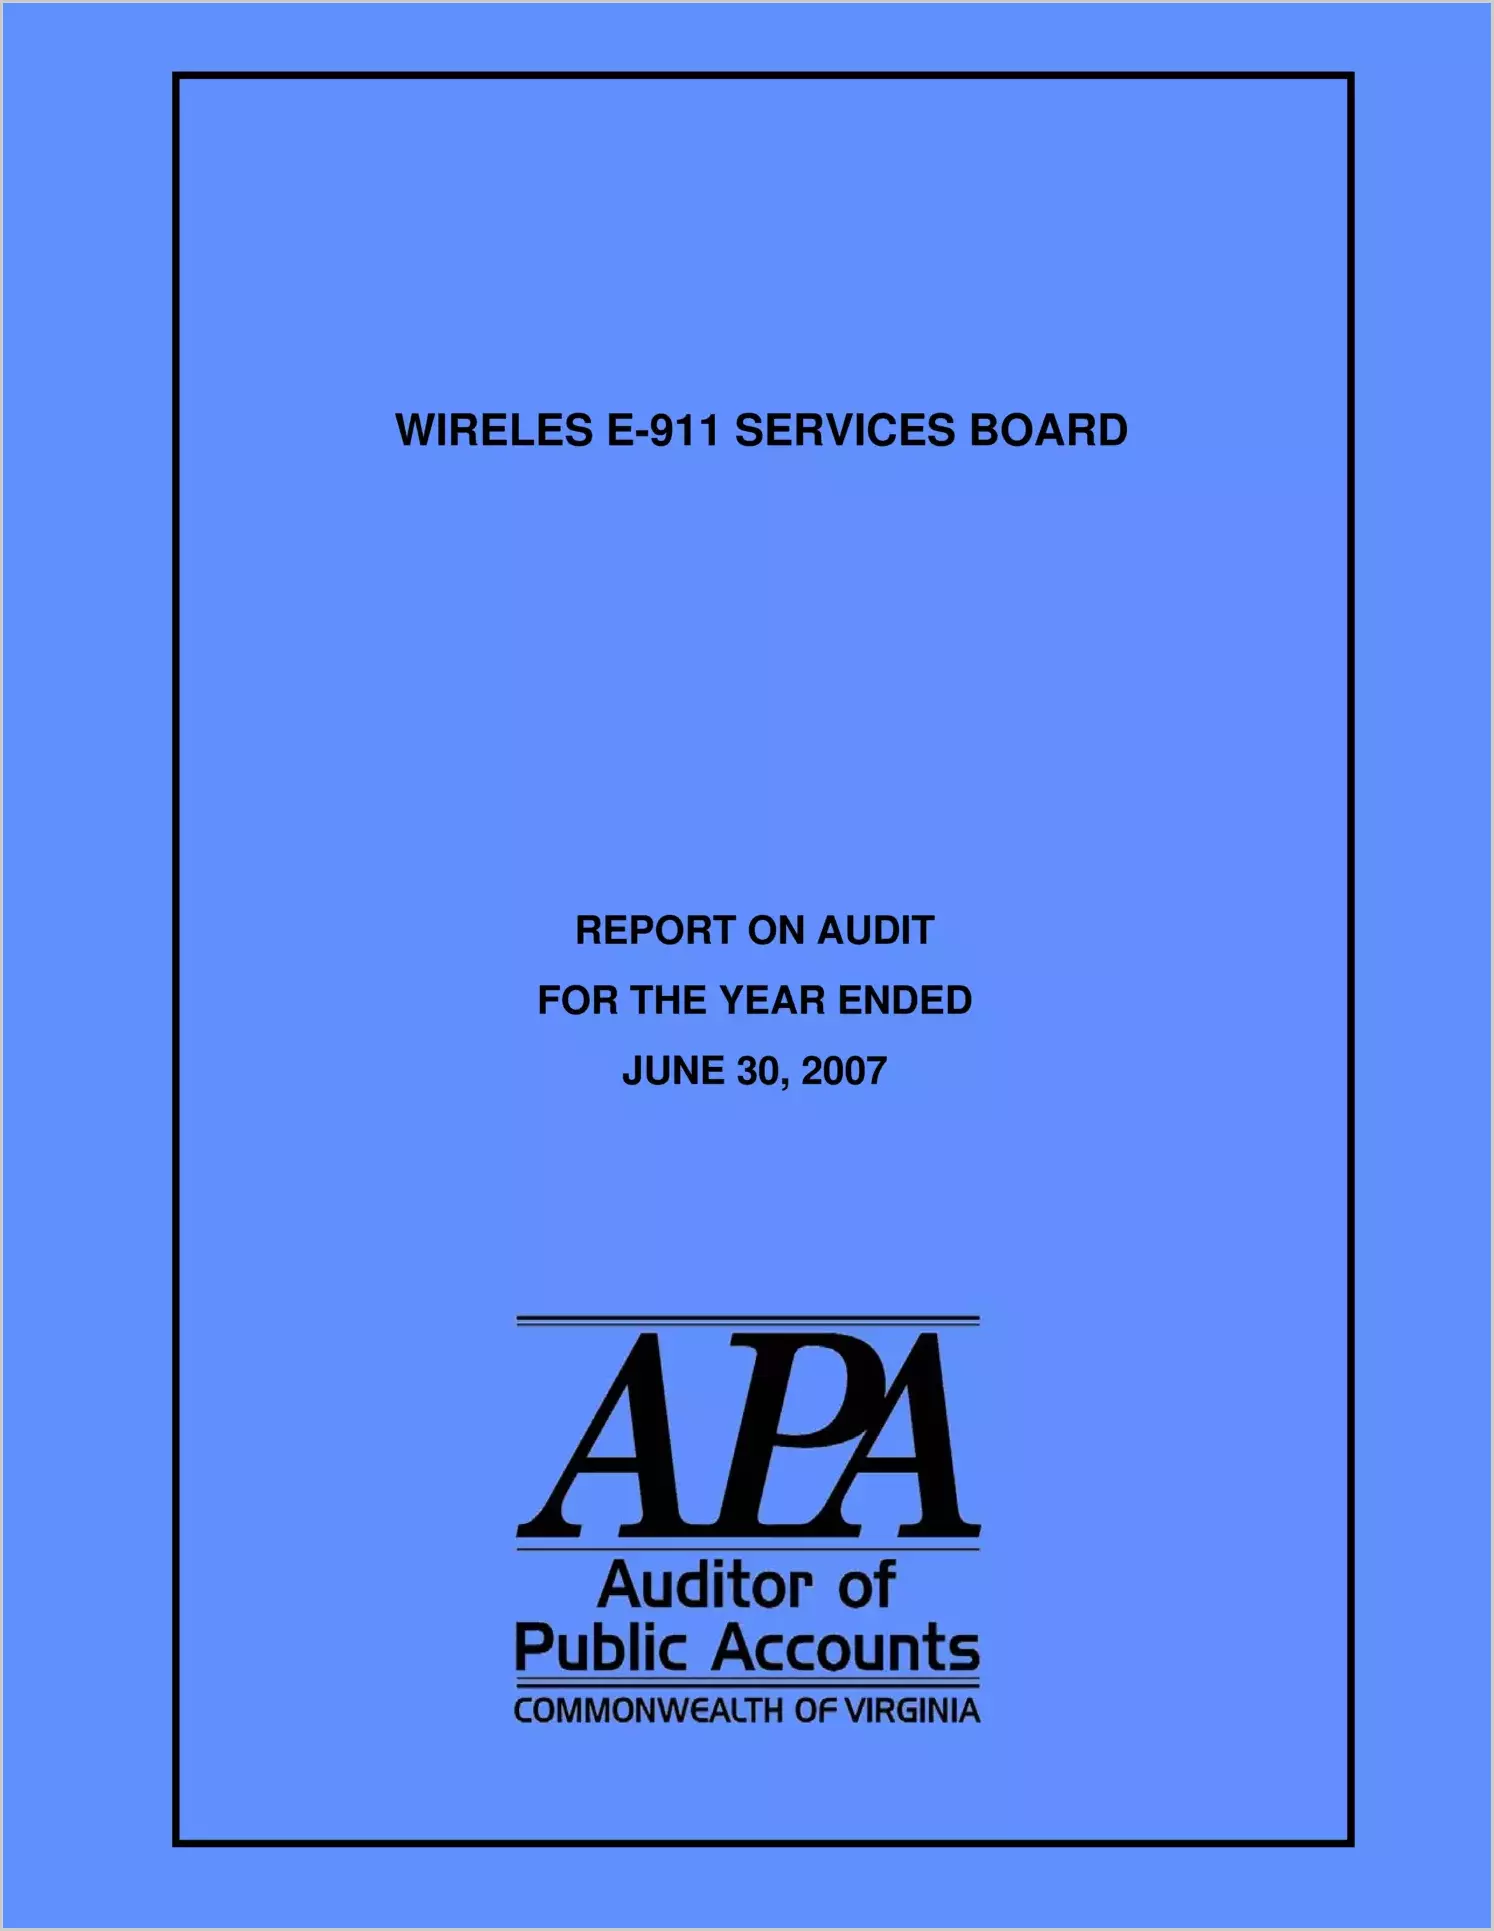 Wireless E-911 Services Board report on audit for the year ended June 30, 2007